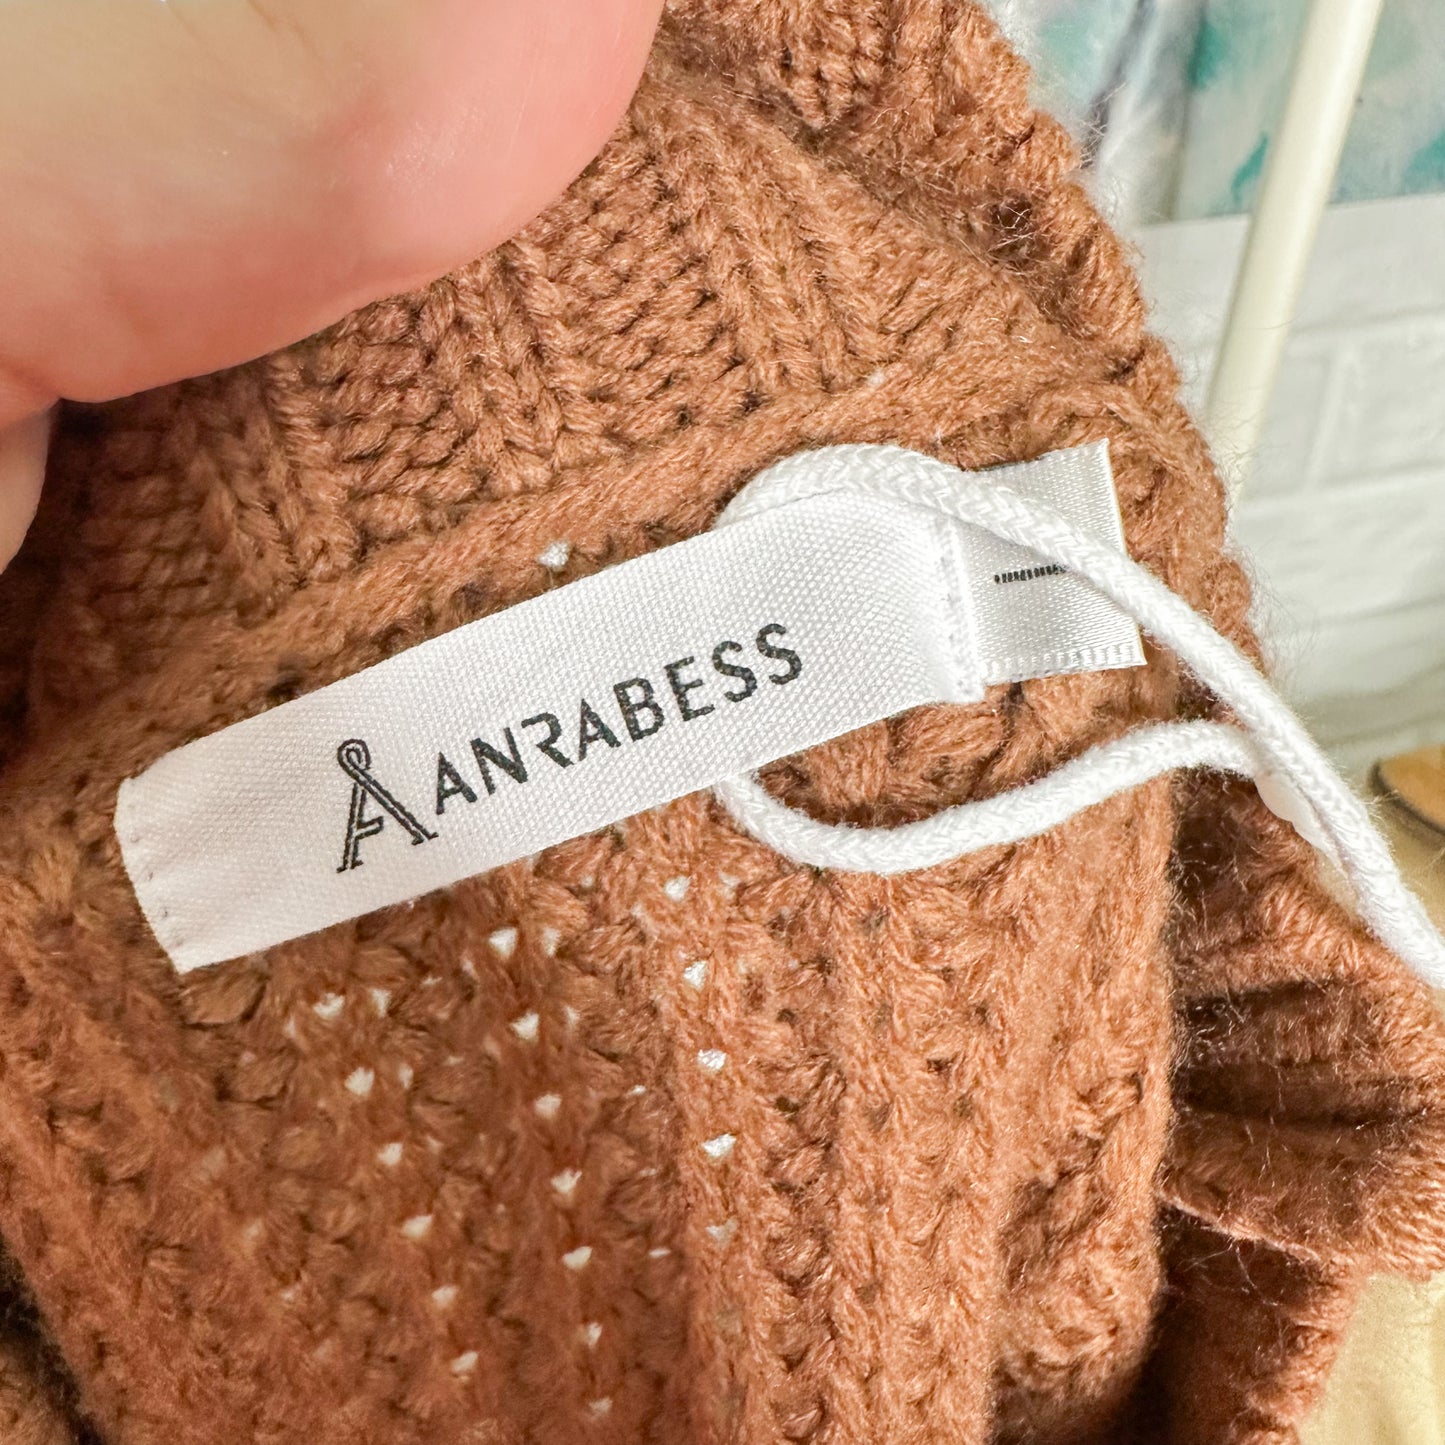 Anrabess New Brown Sweater Dress Size Large